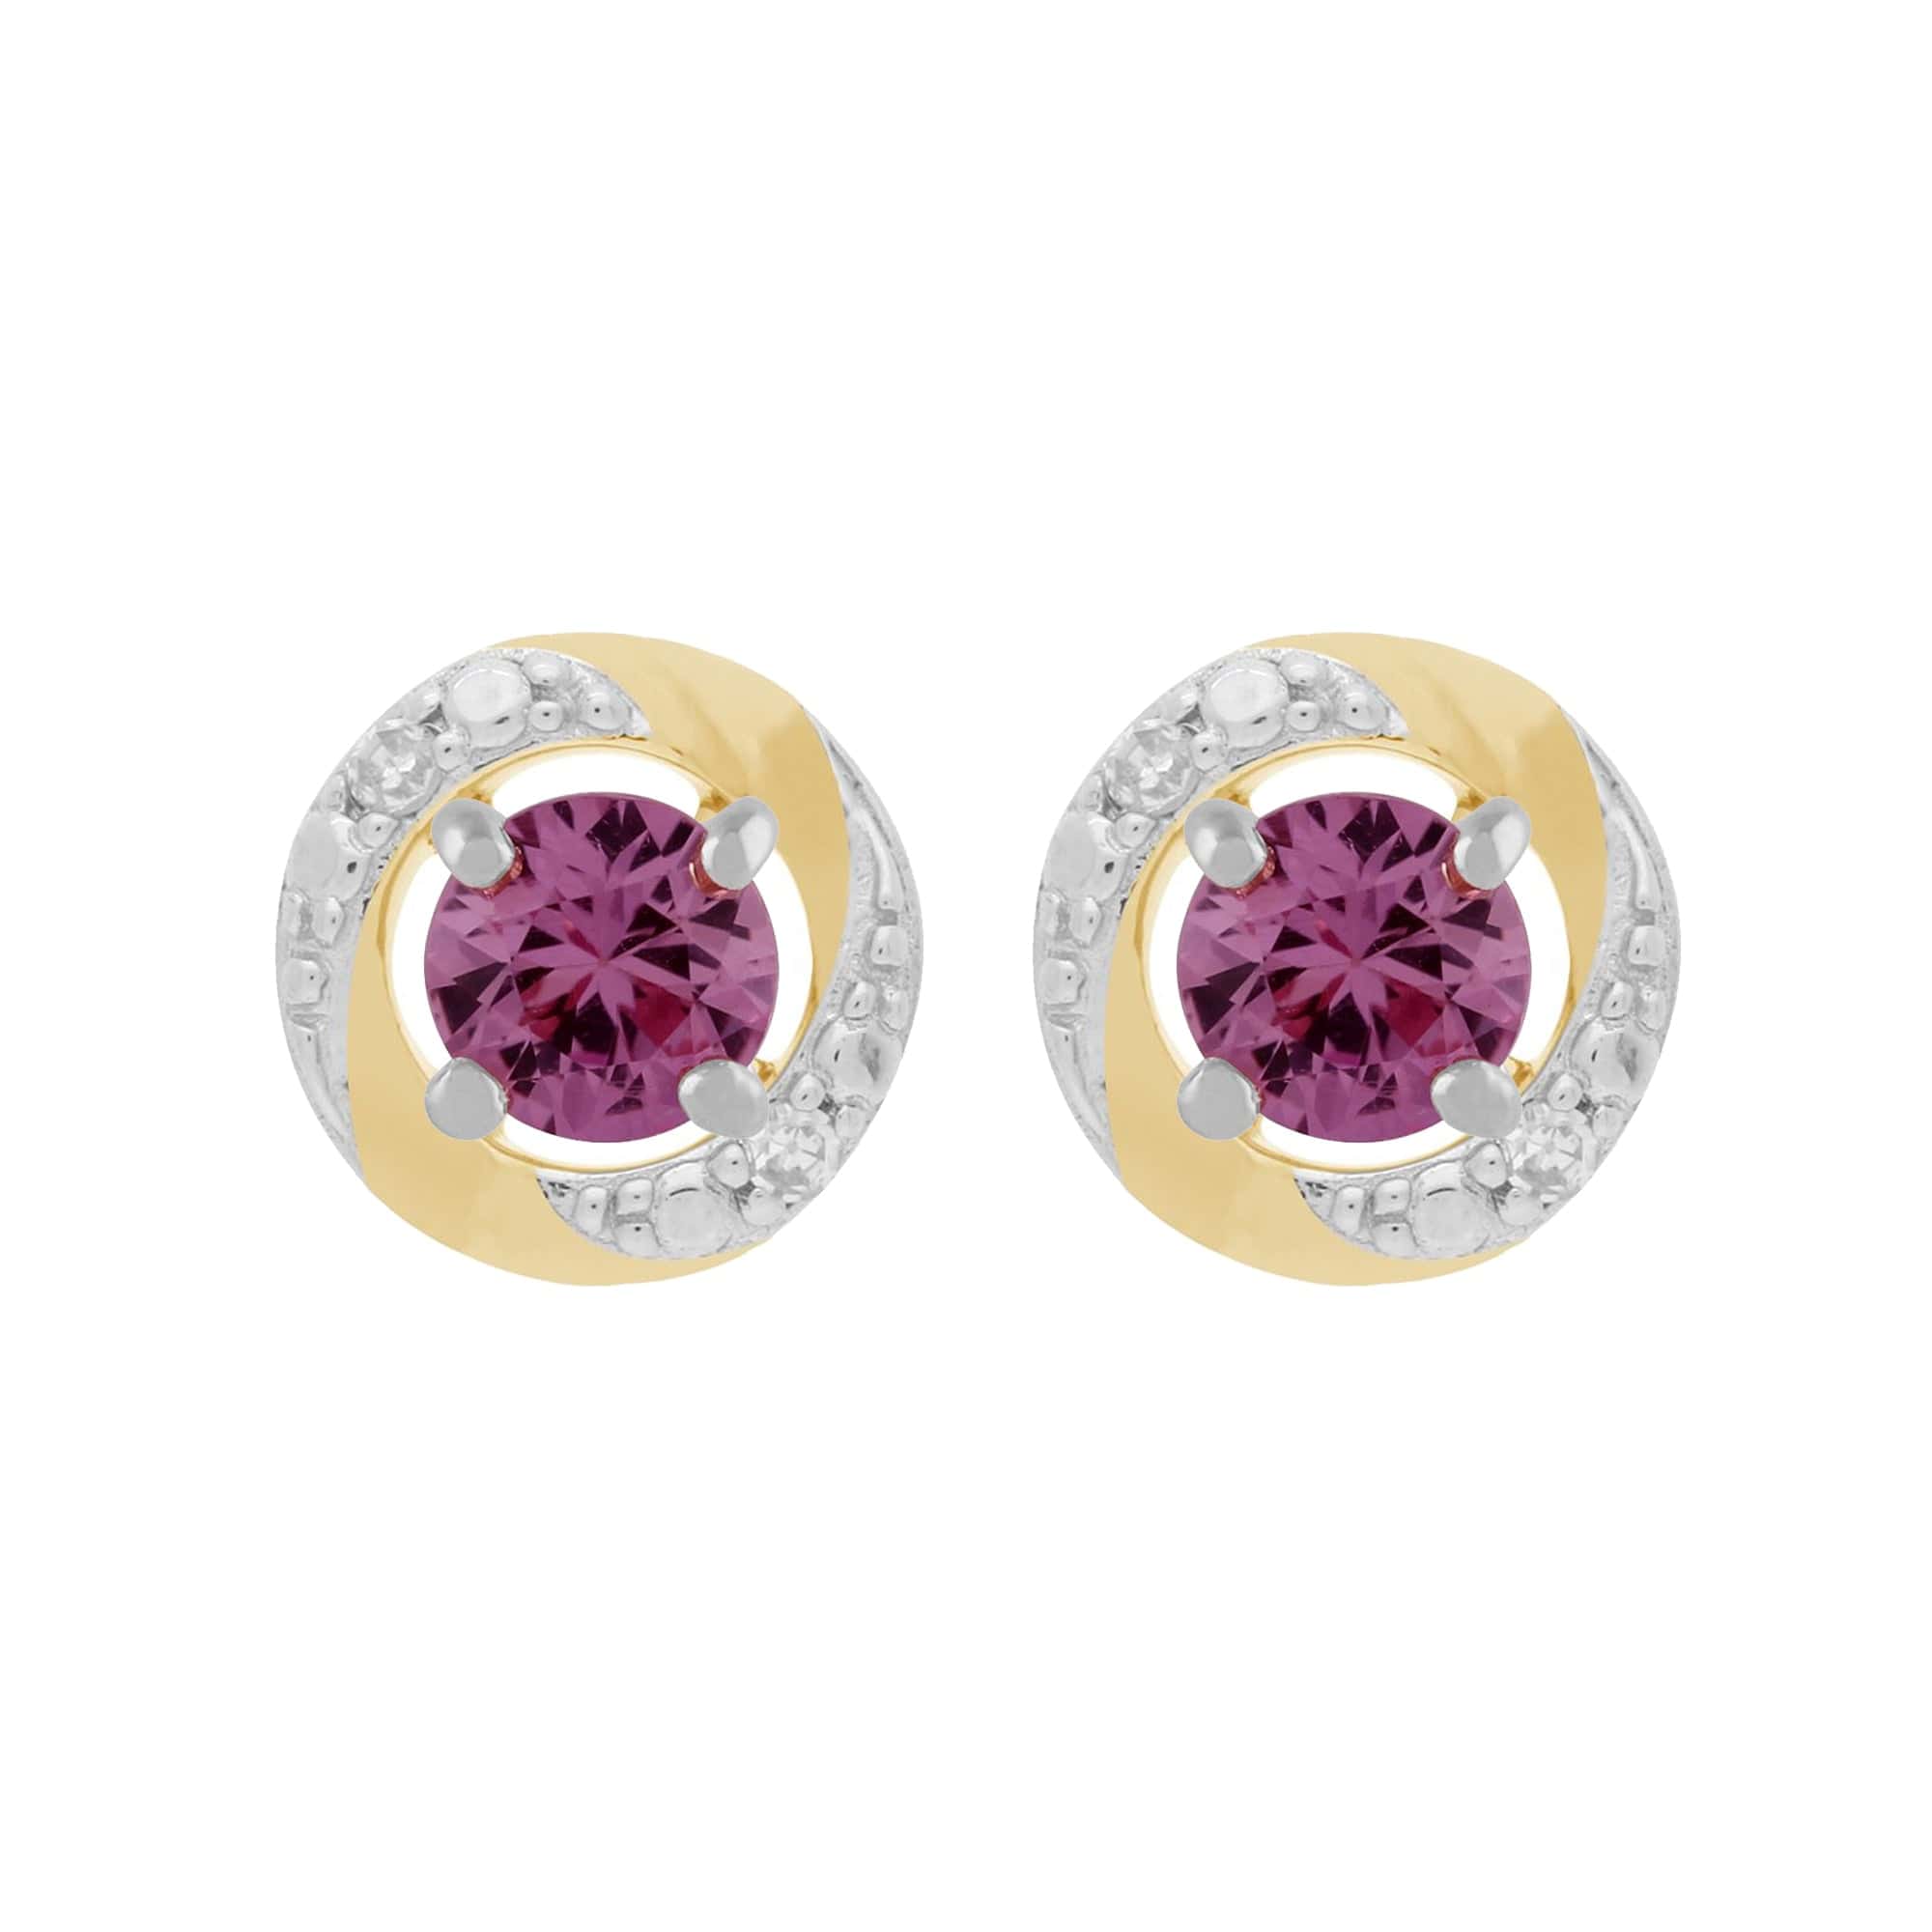 117E0031159-191E0374019 9ct White Gold Pink Sapphire Stud Earrings with Detachable Diamond Halo Ear Jacket in 9ct Yellow Gold 1